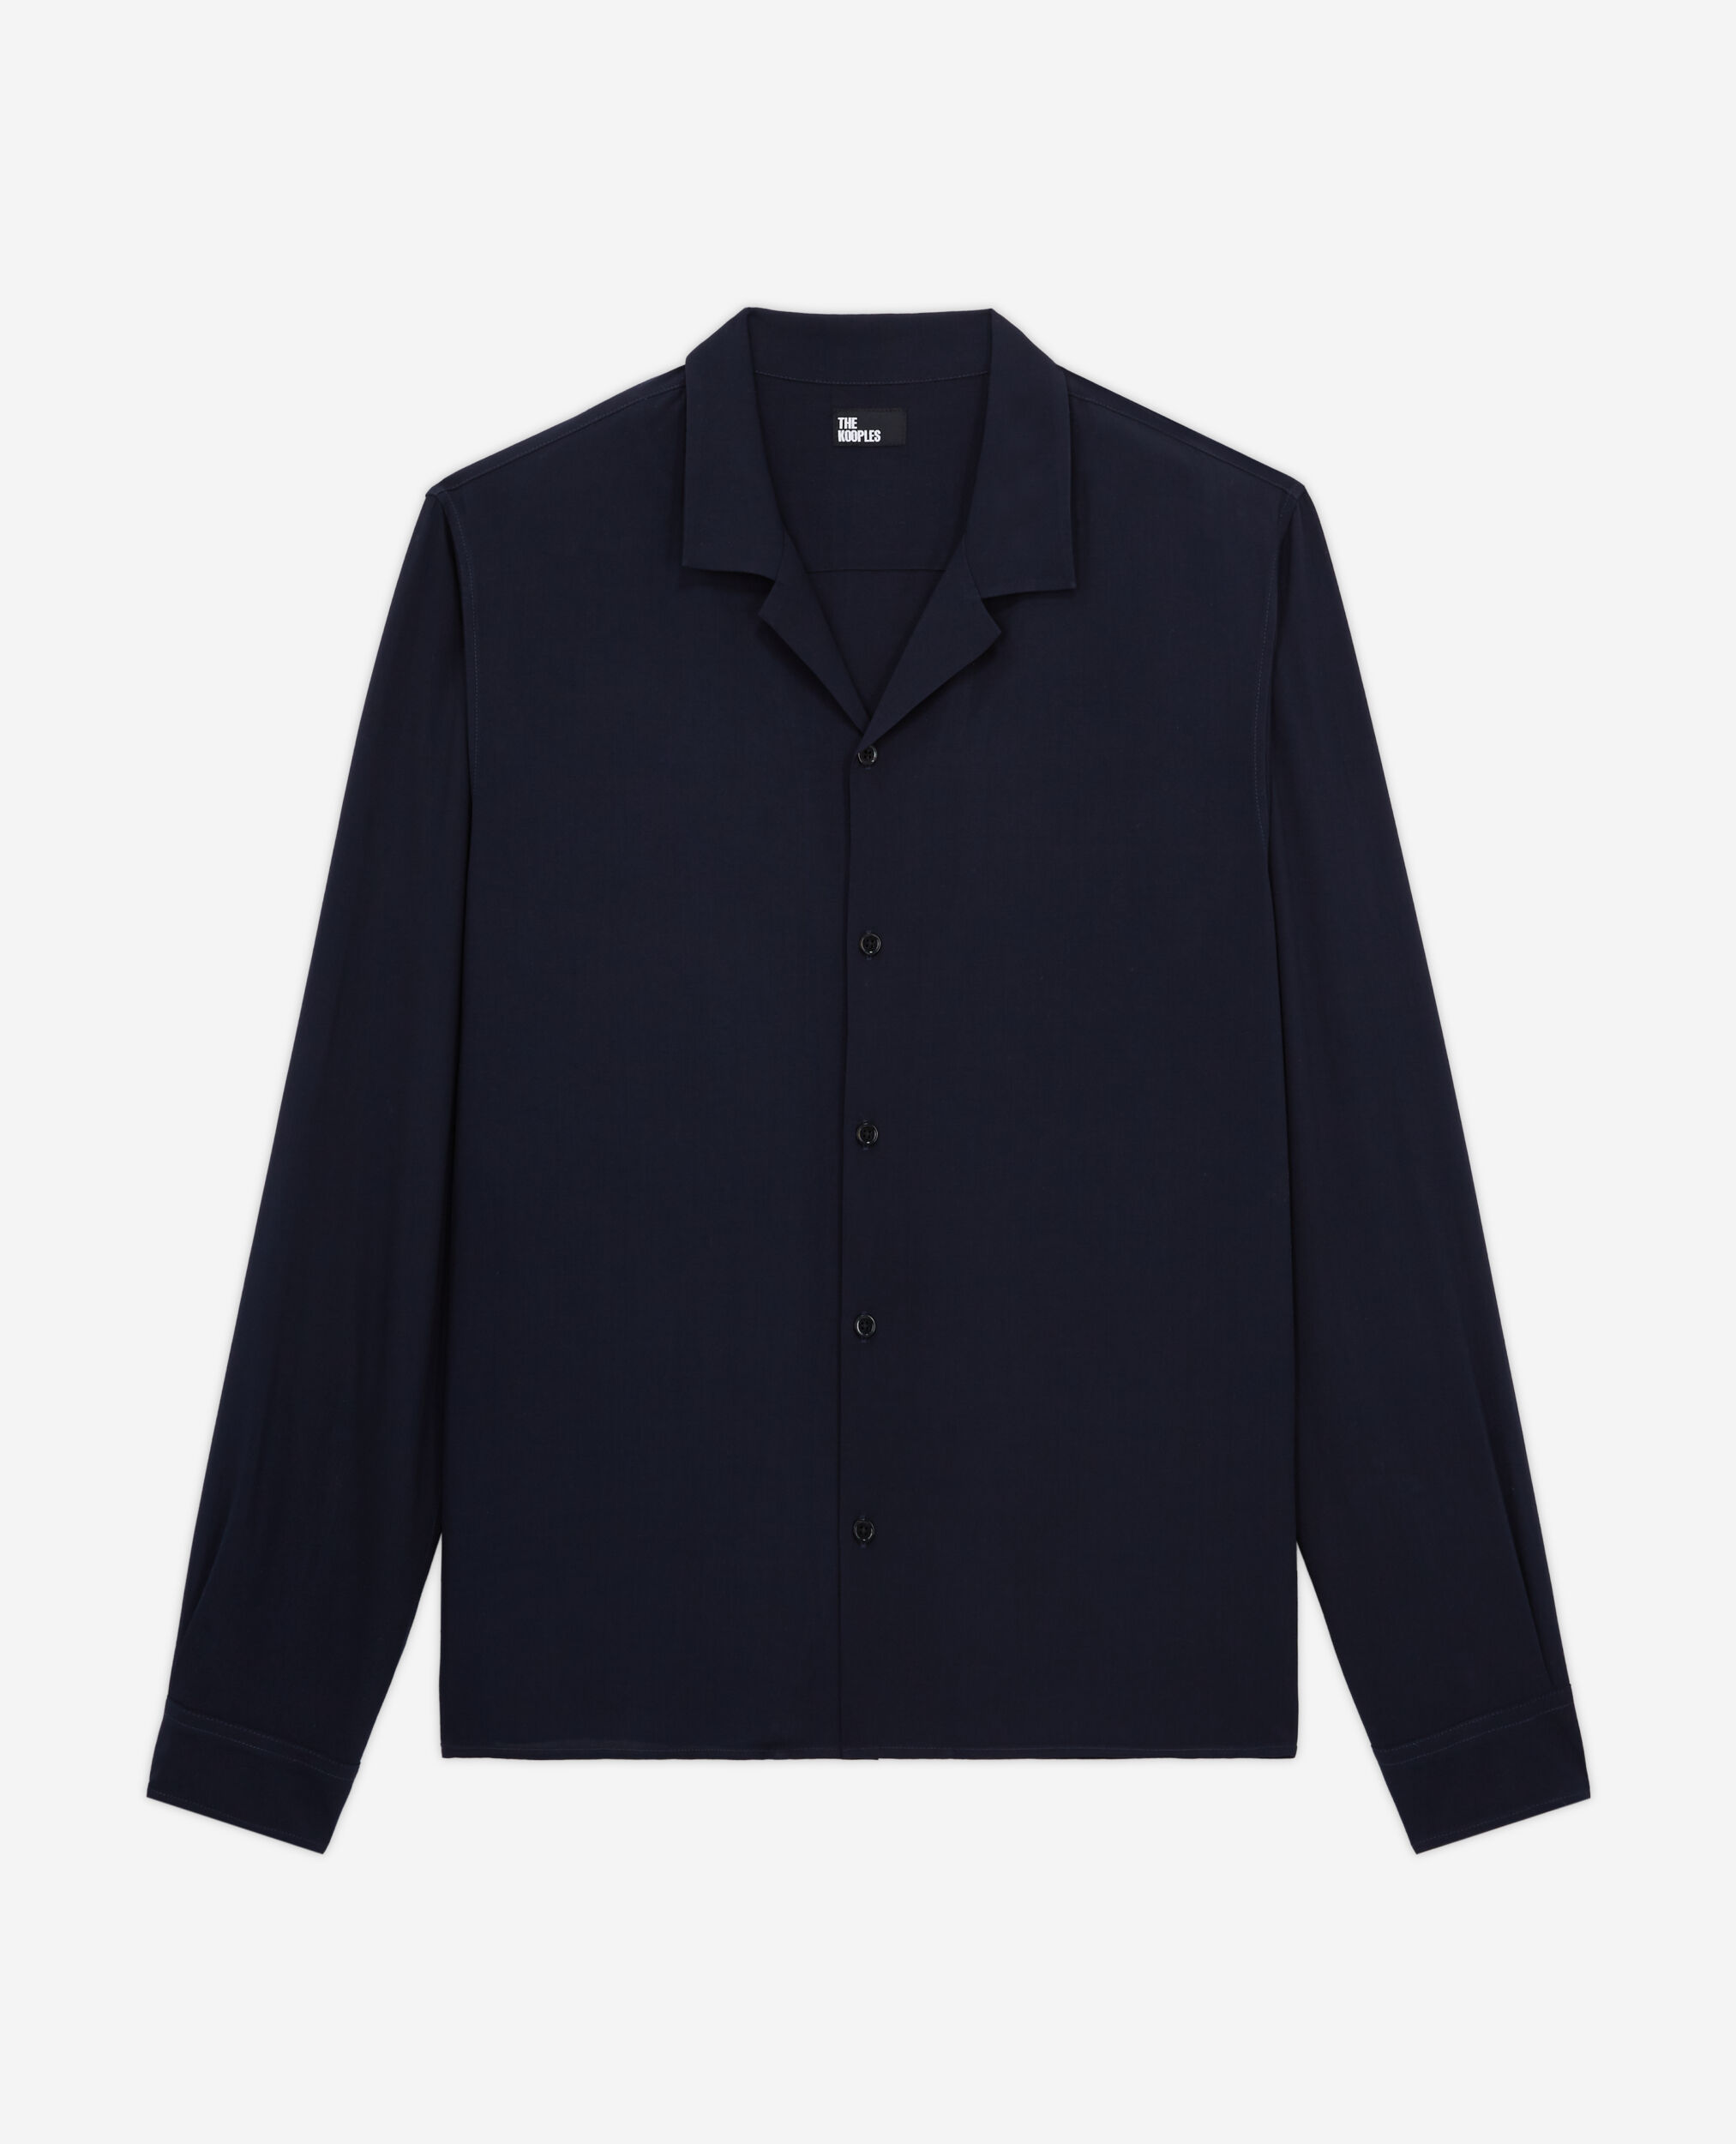 Chemise bleue, NAVY, hi-res image number null